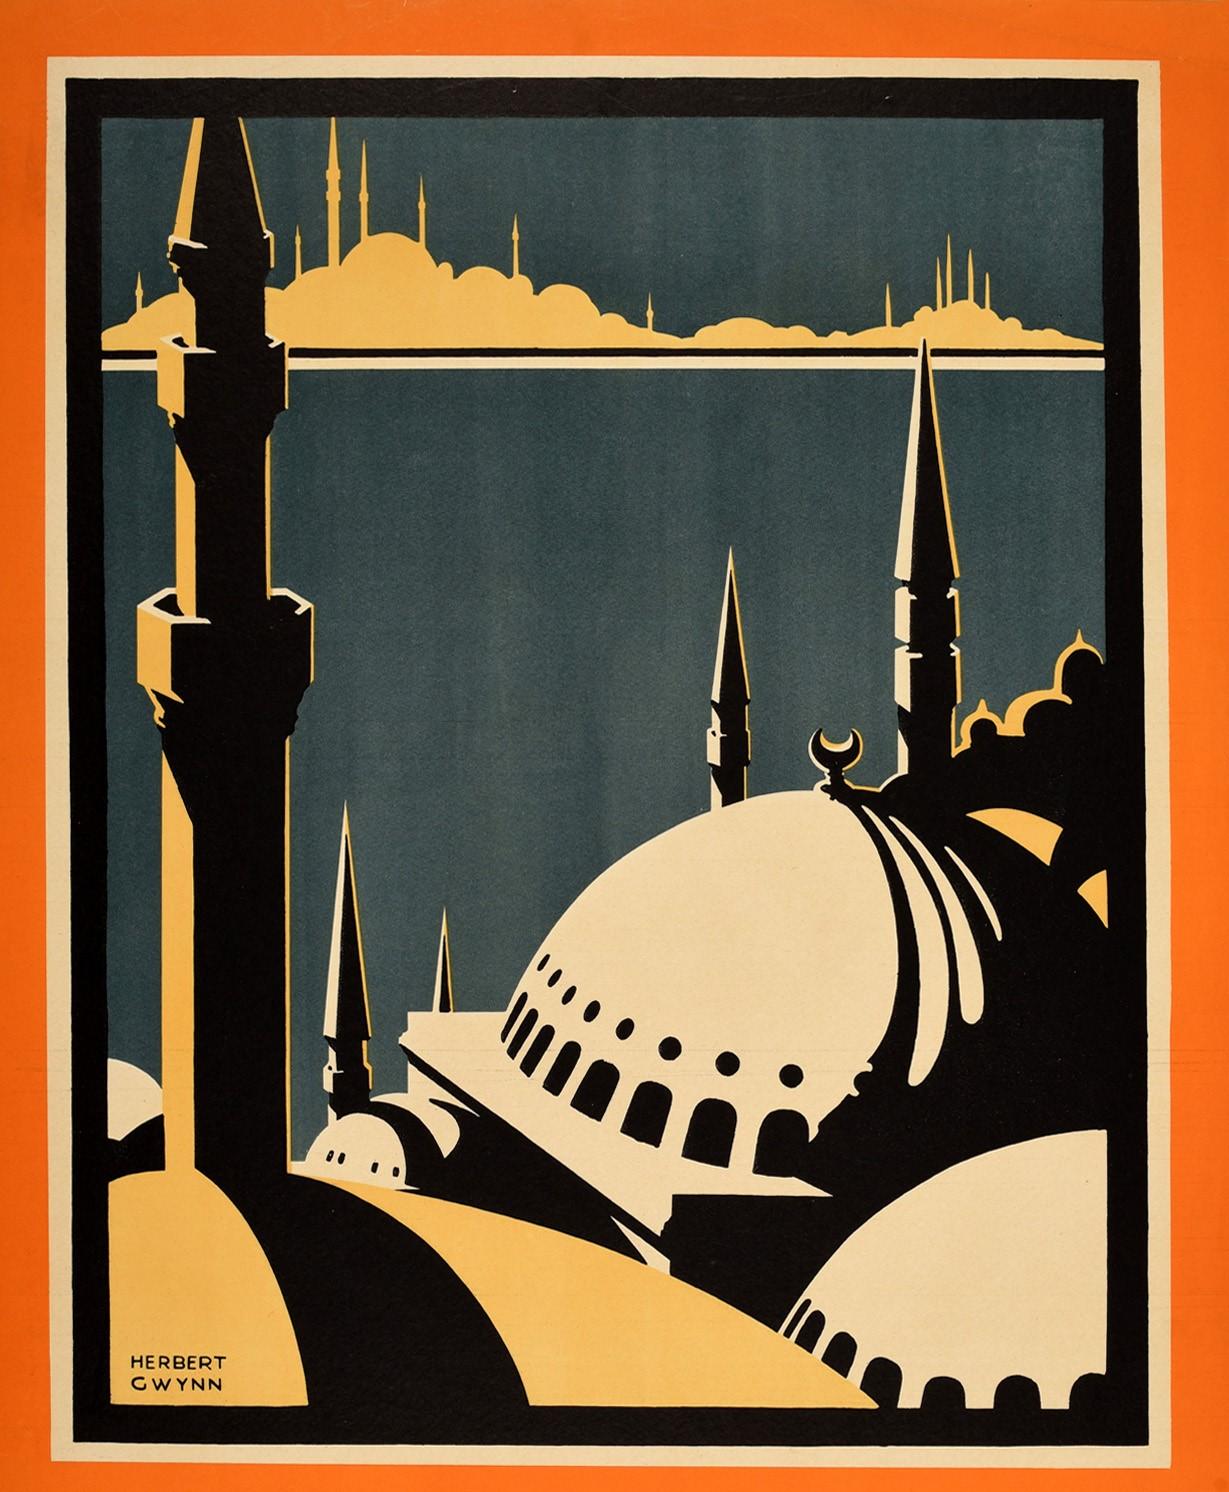 Original vintage cruise travel poster for Mediterranean and Constantinople issued by Orient Line Cruises featuring a stunning Art Deco design by Herbert Gwynn (1873-1956) depicting a view over domes and minaret towers across the blue sea towards a